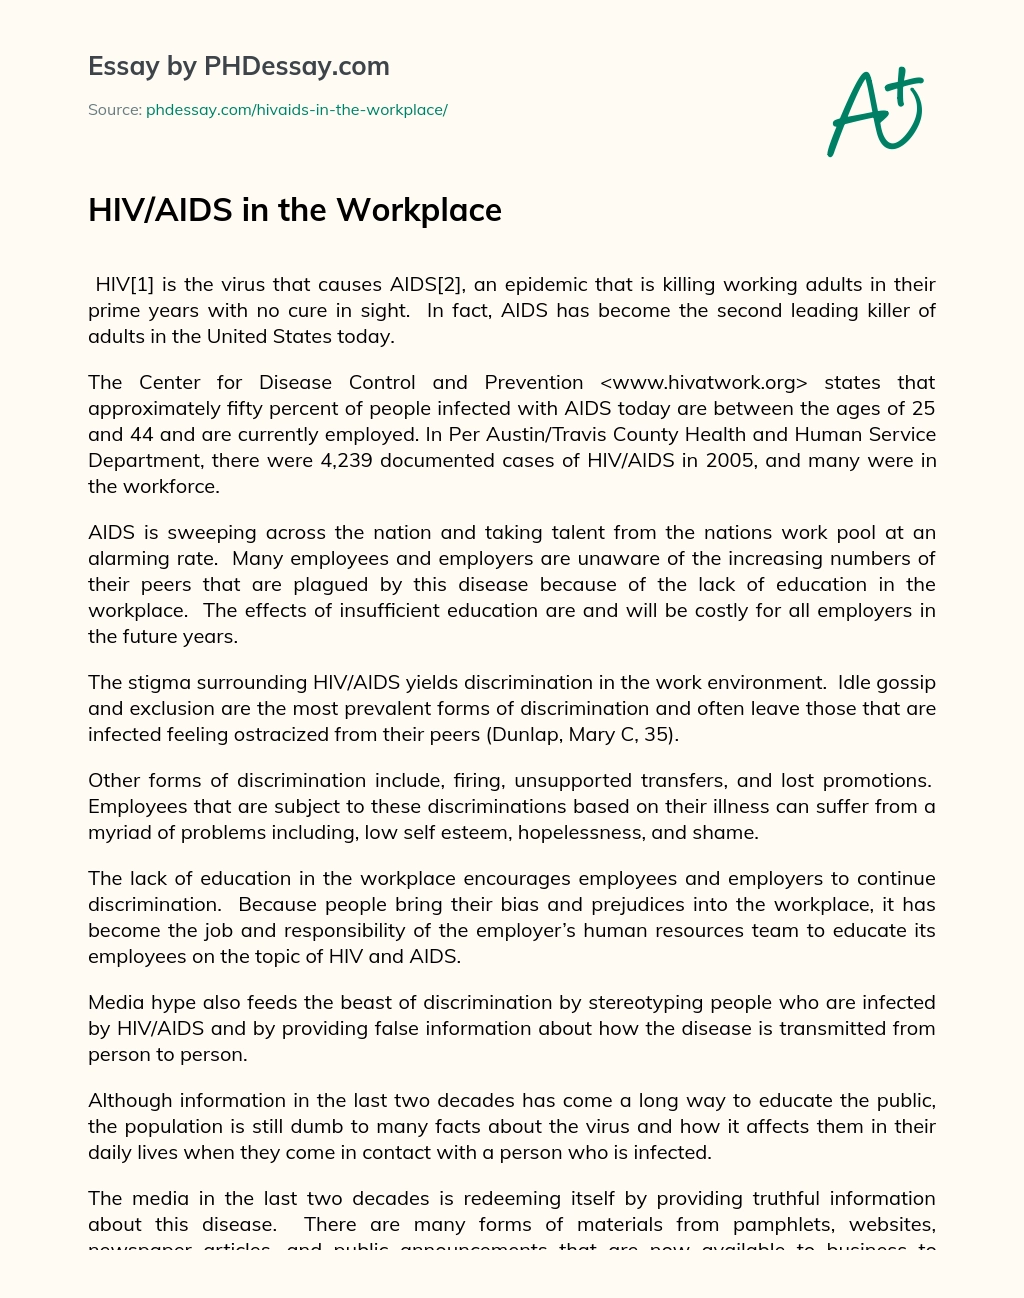 HIV/AIDS in the Workplace essay